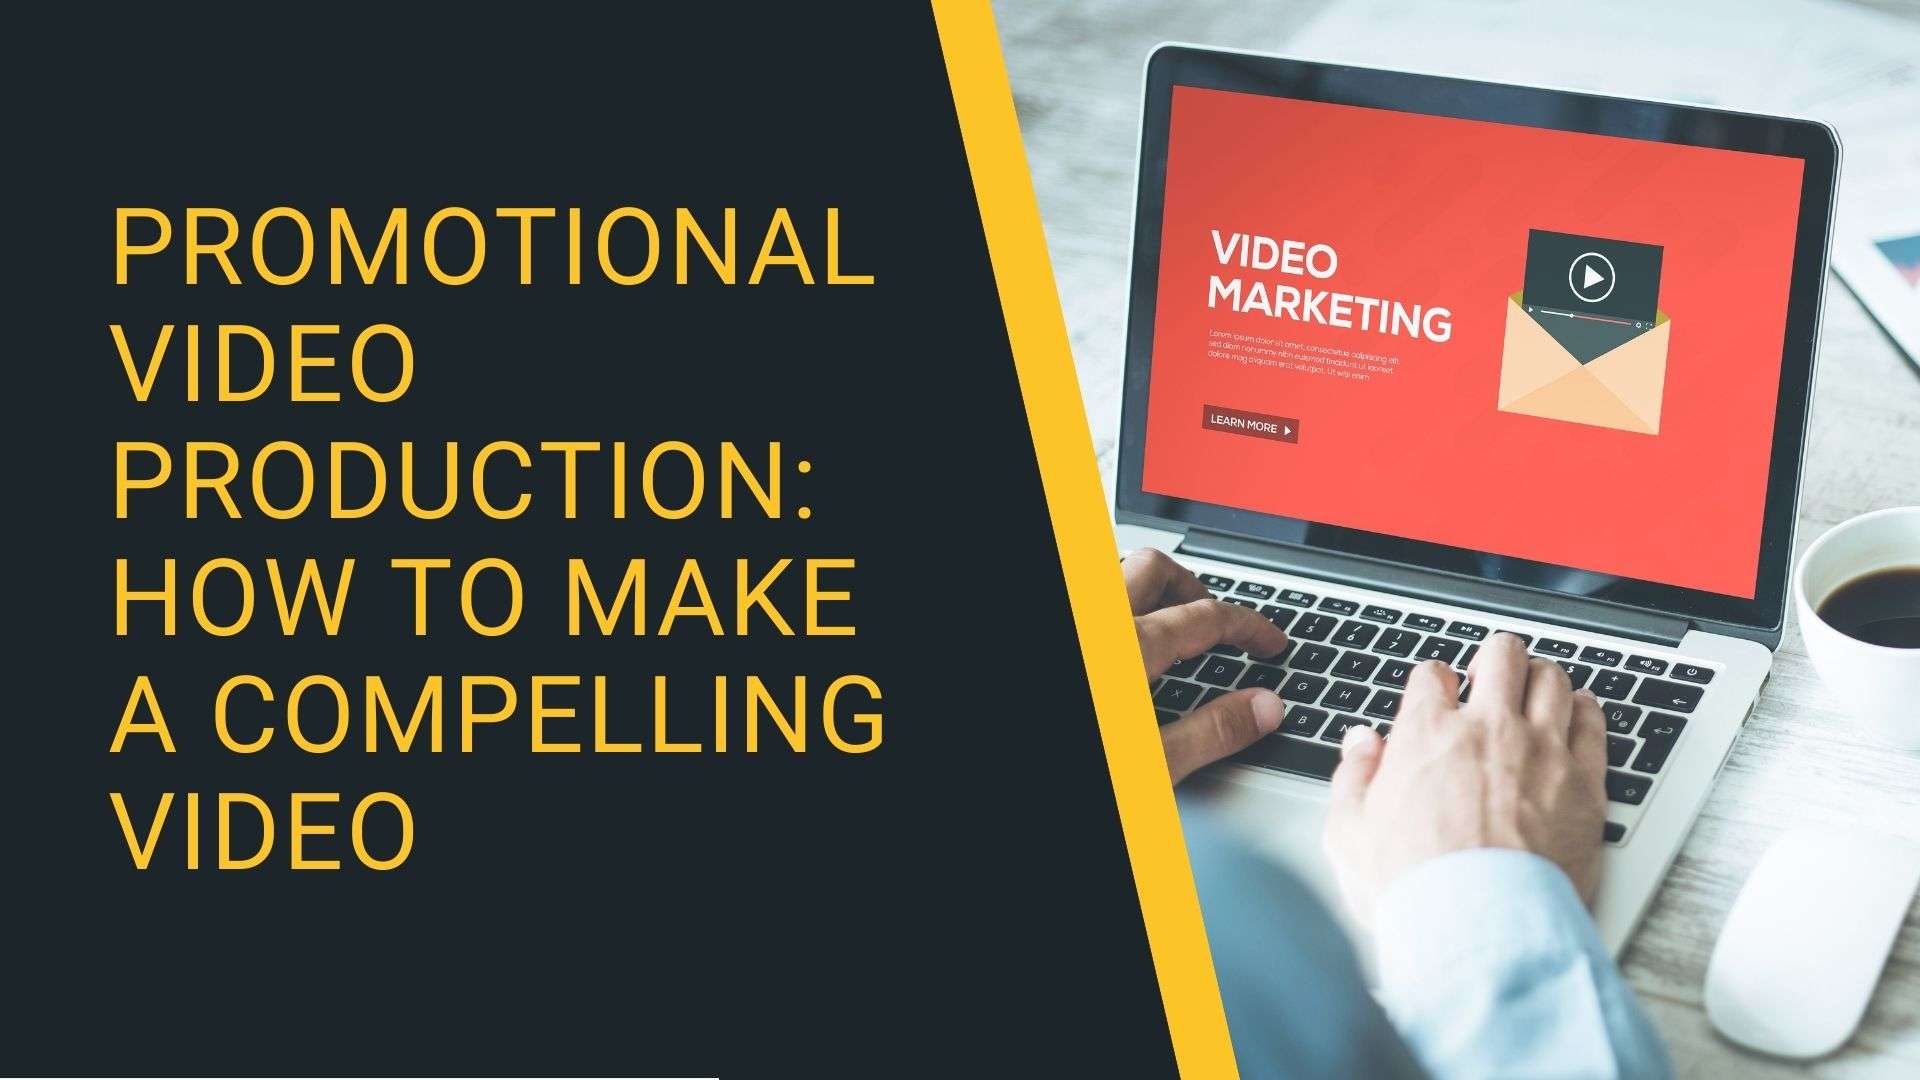 Promotional Video Production: How to Make a Compelling Video